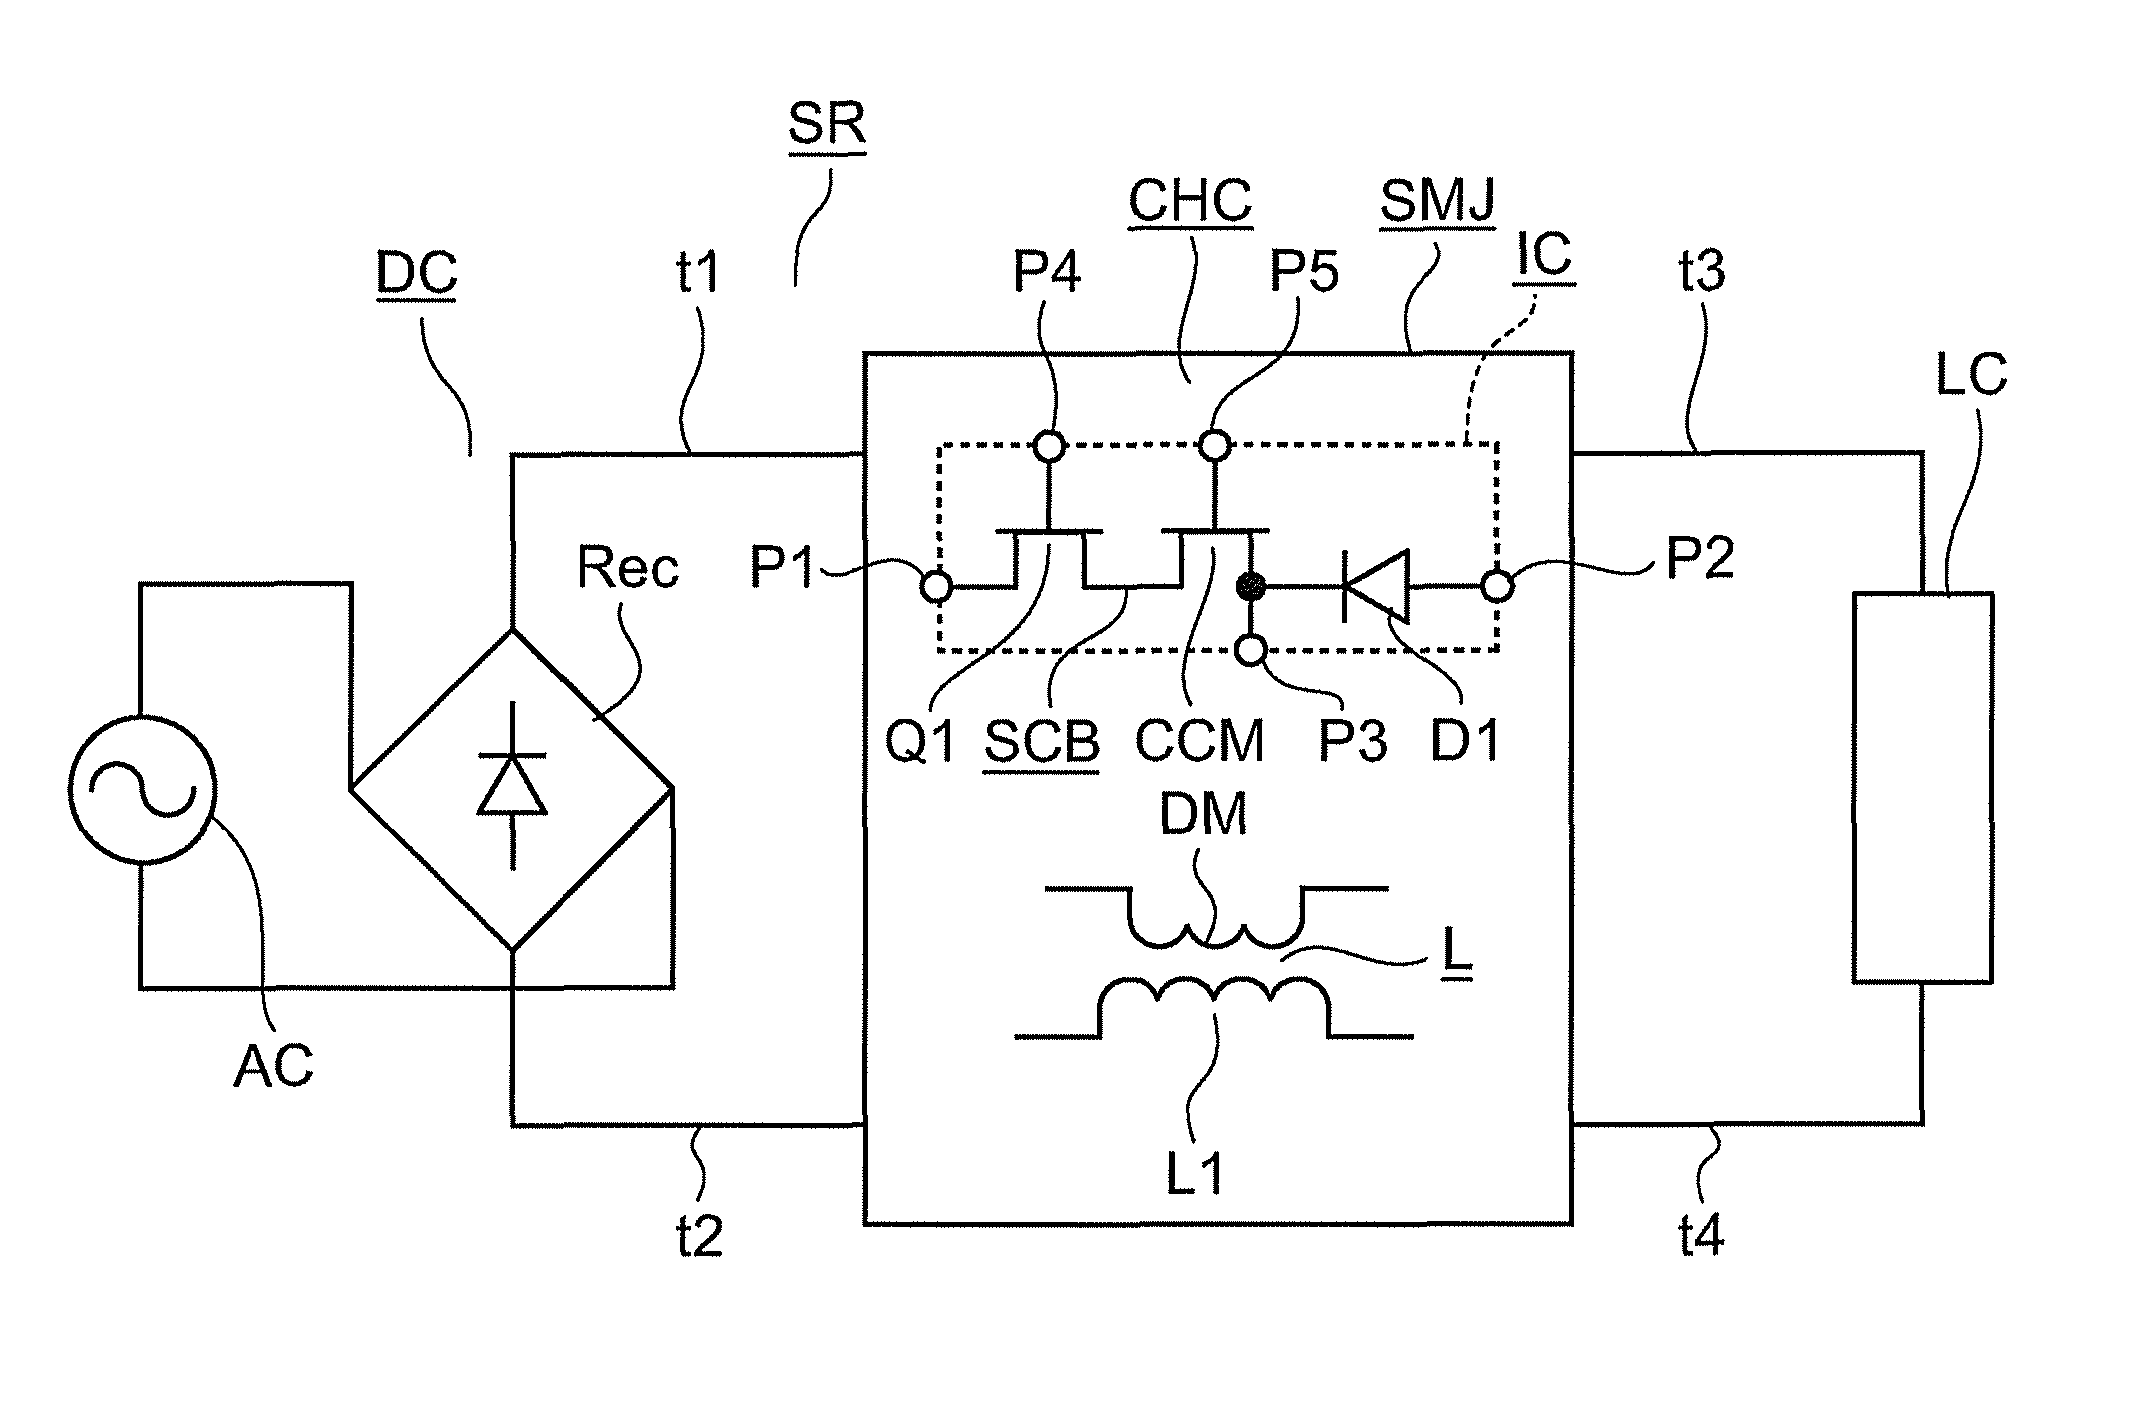 Switching power supply device, switching power supply circuit, and electrical equipment